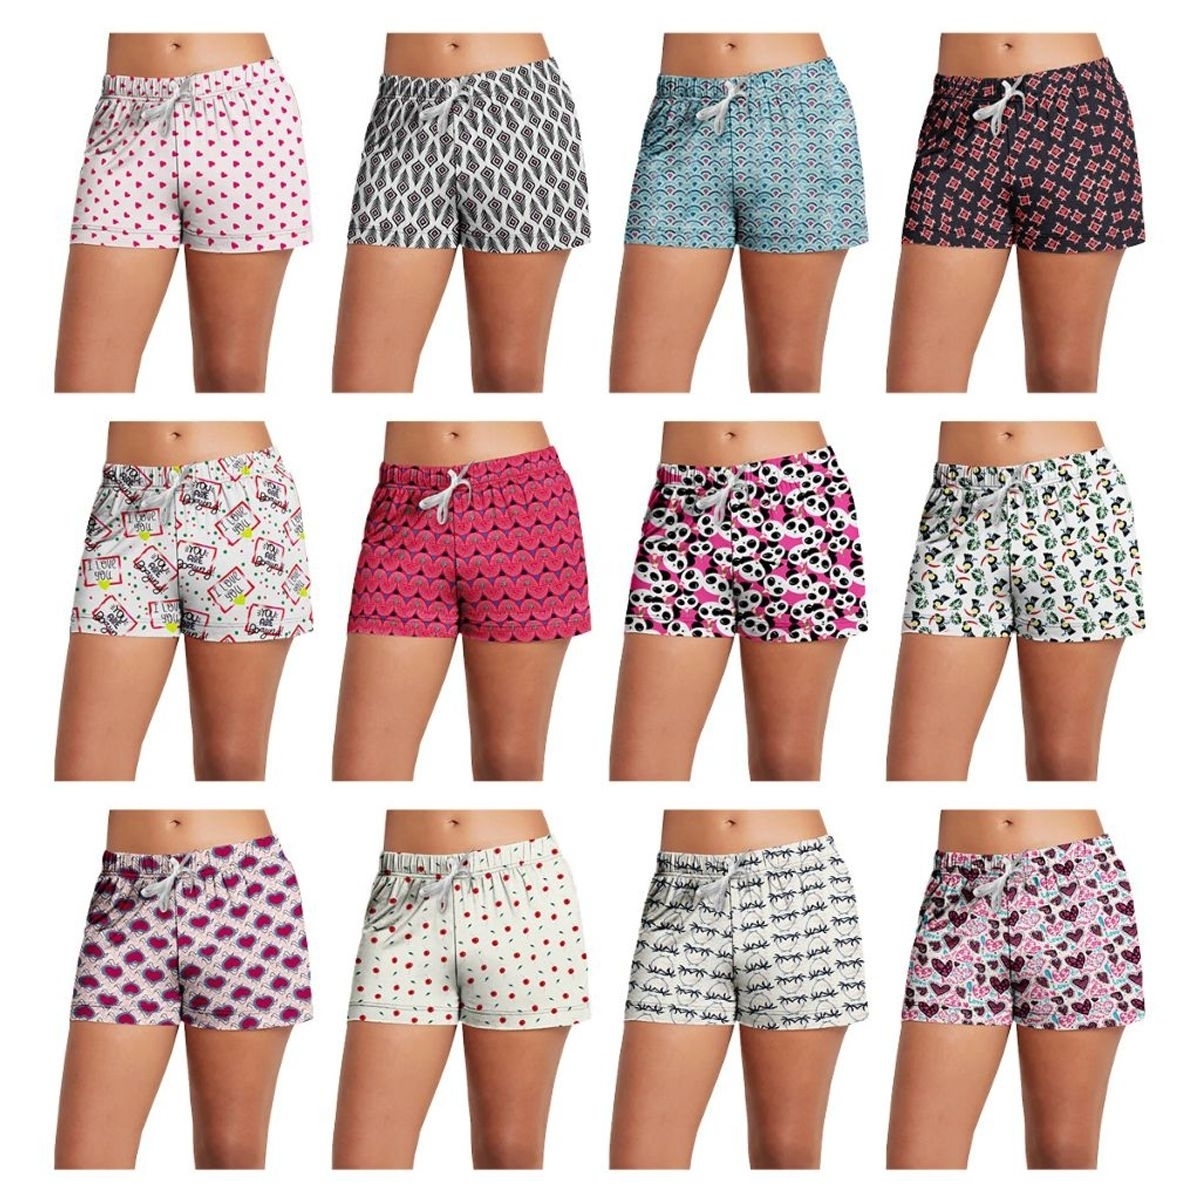 Multi-Pack: Women's Super-Soft Lightweight Fun Printed Comfy Lounge Bottom Pajama Shorts W/ Drawstring - 5-pack, Small, Shapes